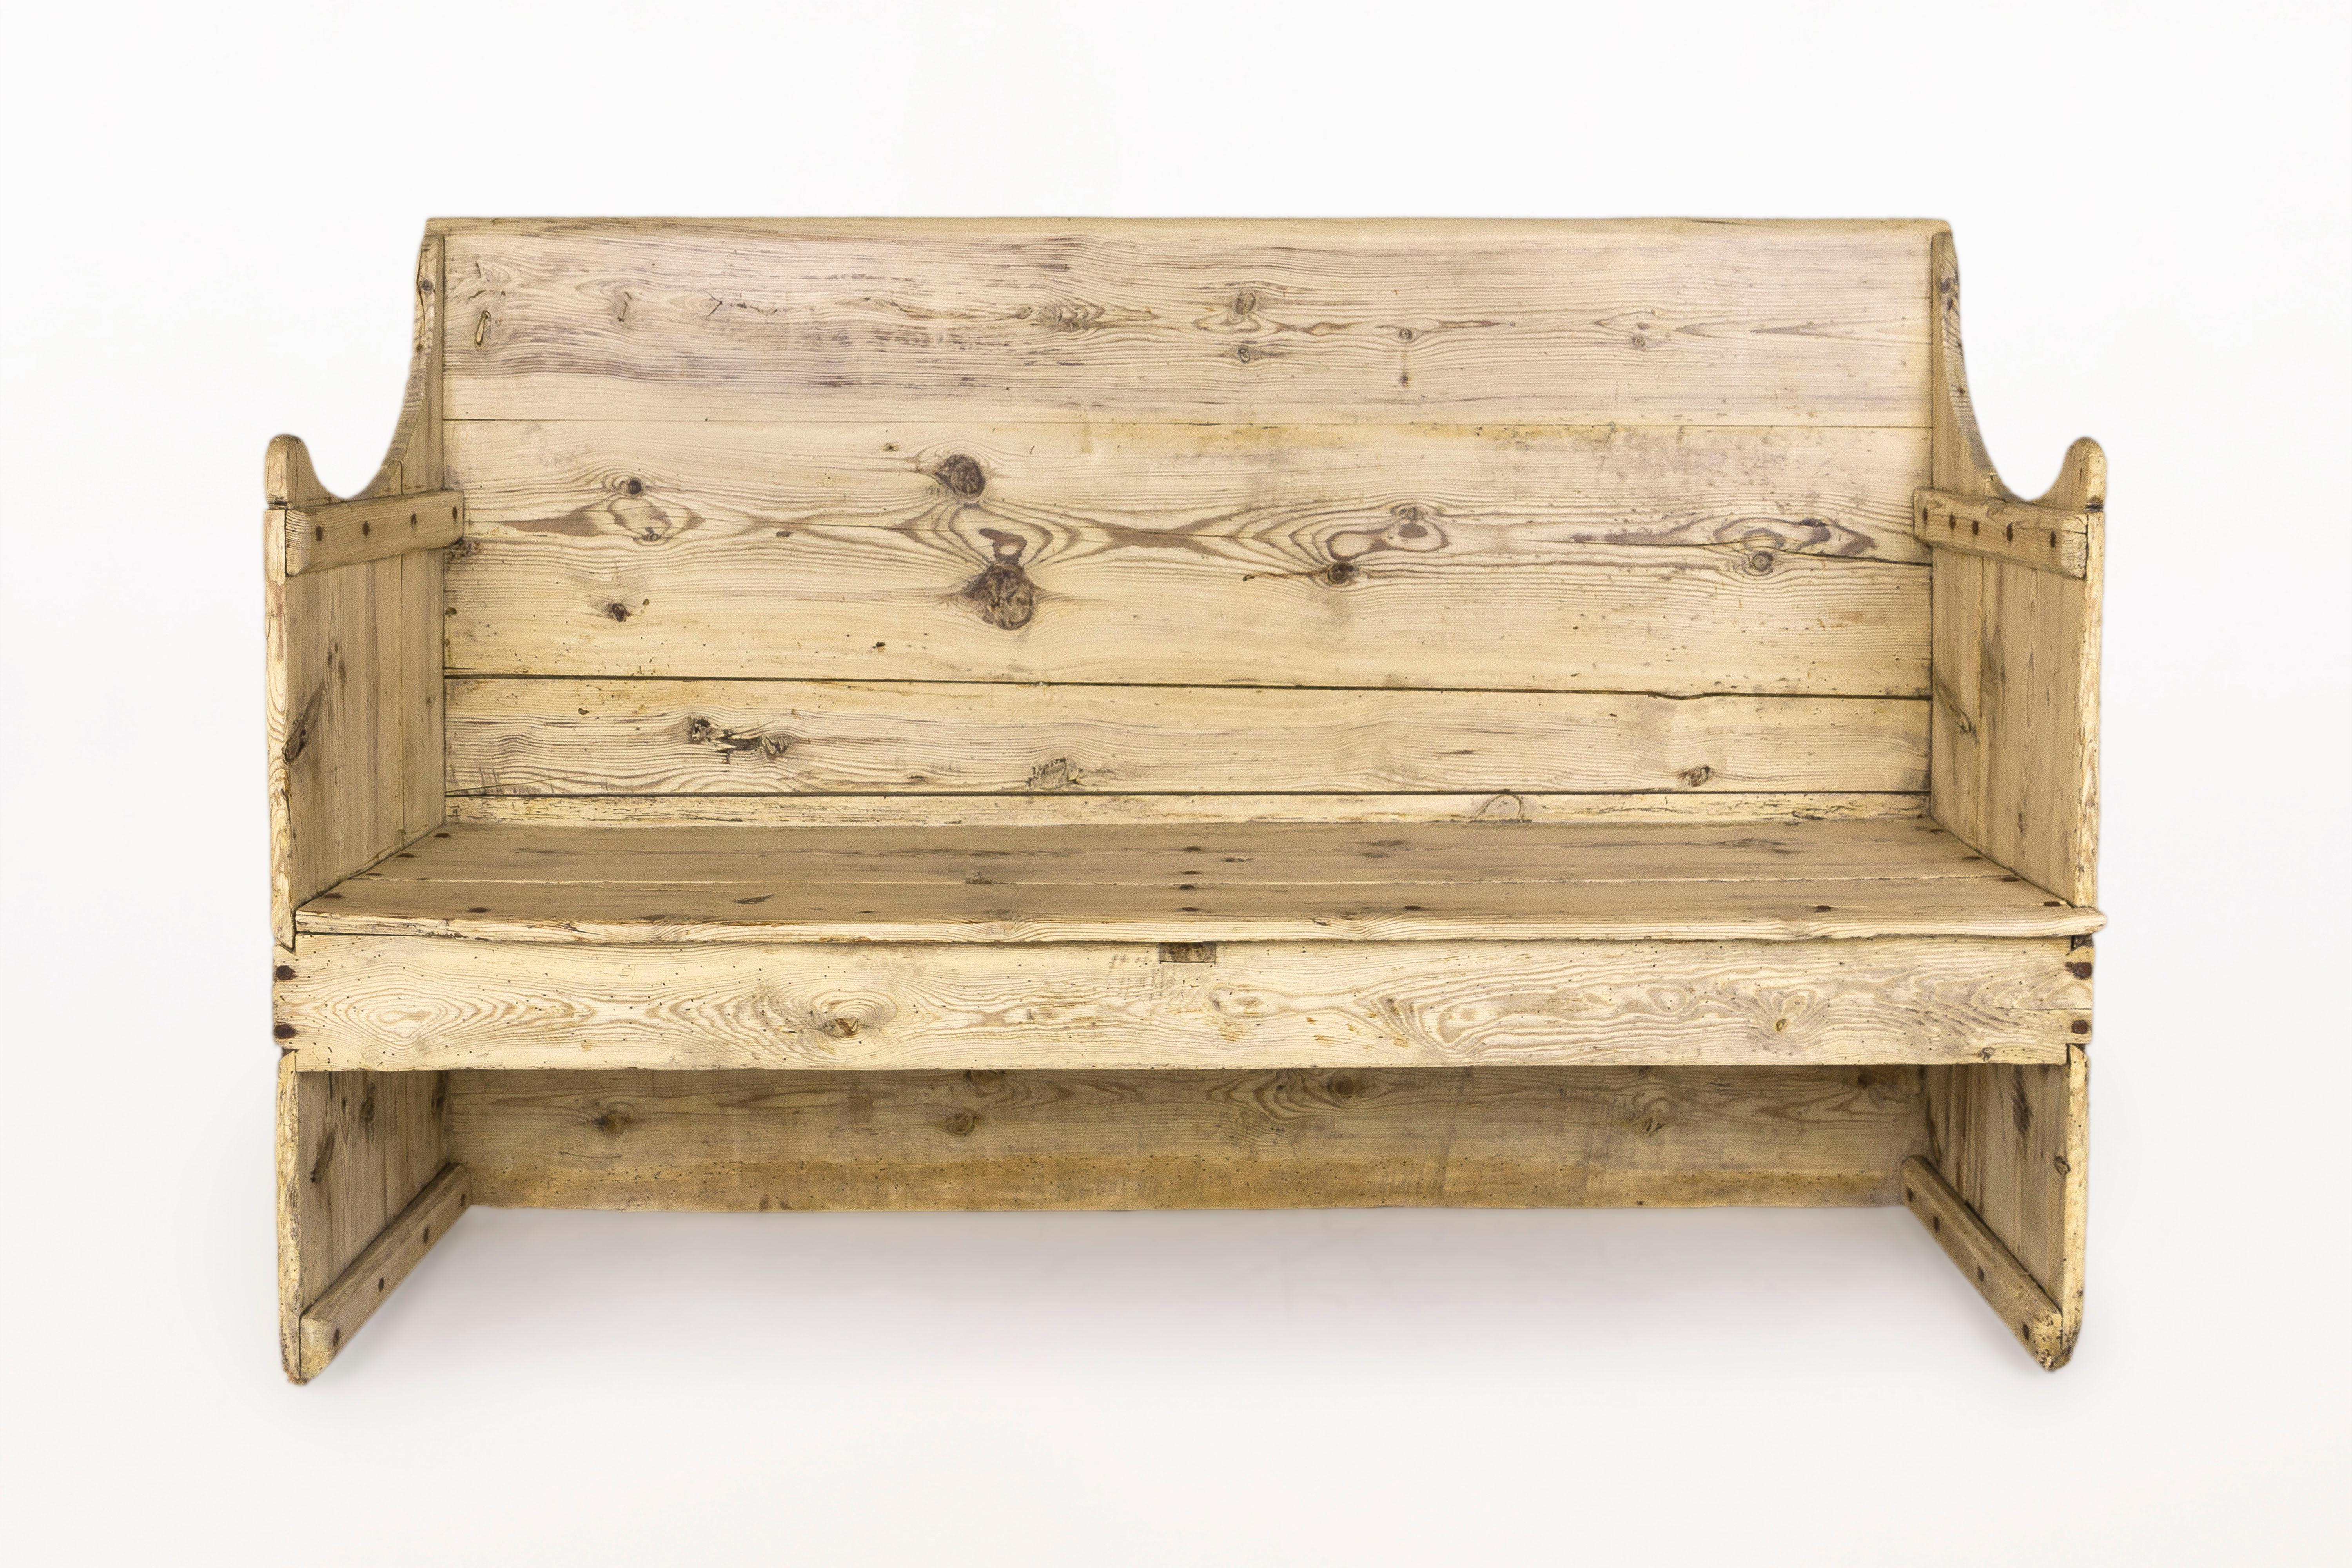 Rustic pine wood bench.
Made with bleached pine wood.
Tall back.
Solid construction
19th century, Spain.
Good vintage condition.